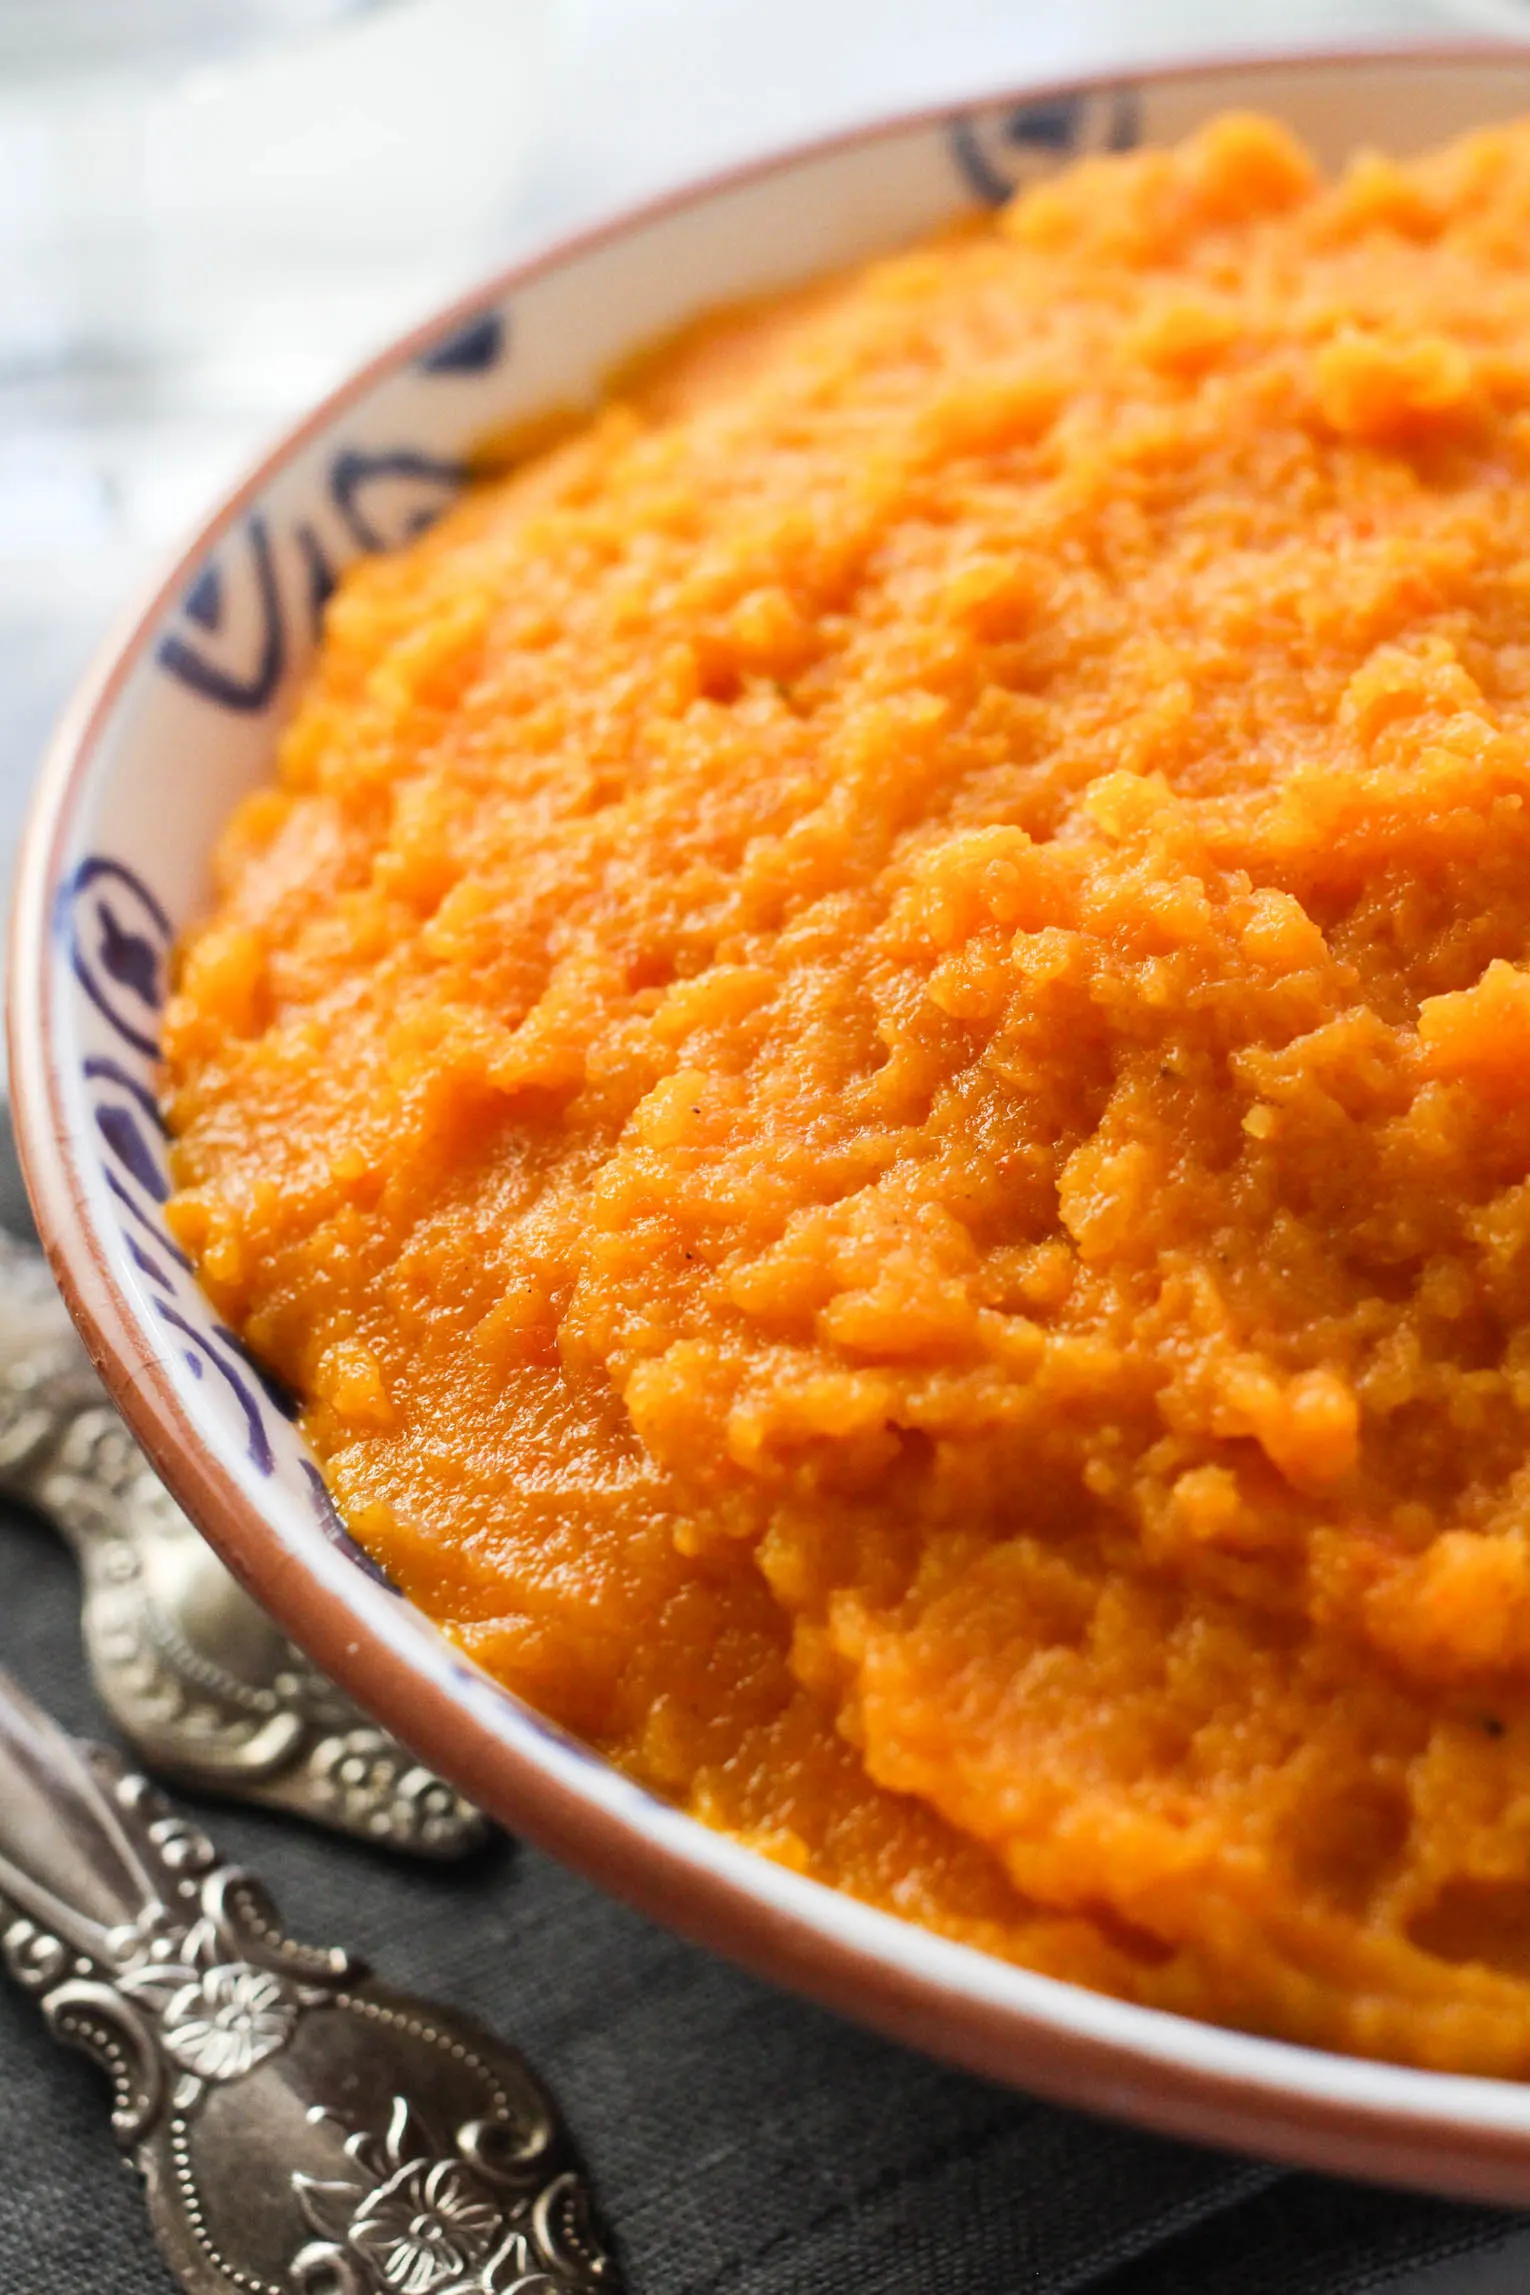 Carrot and swede mash in a bowl.